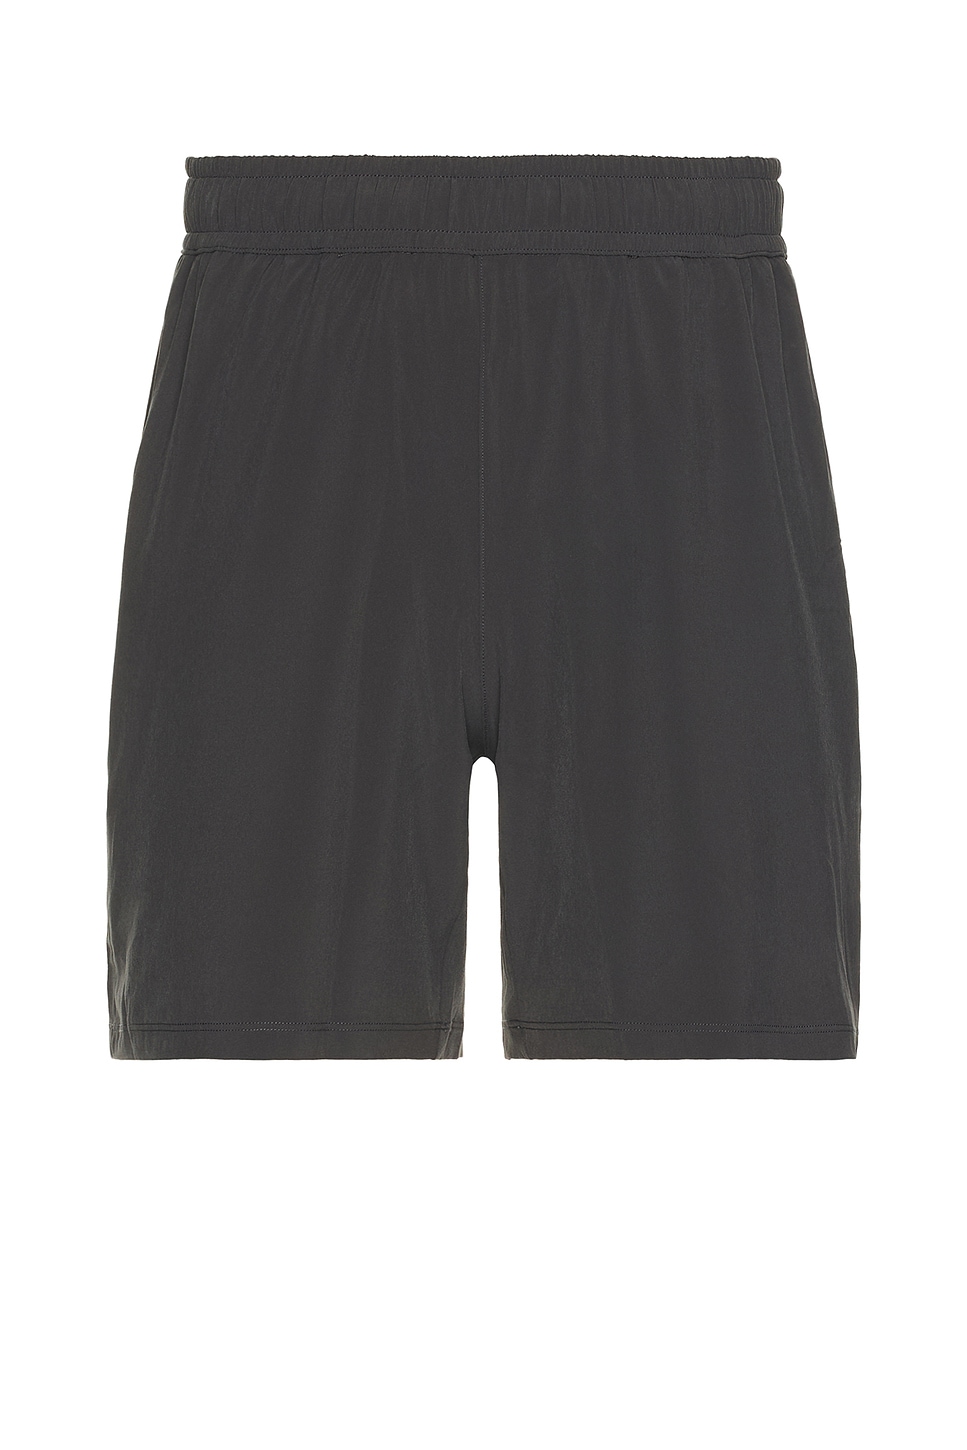 Image 1 of Beyond Yoga Pivotal Performance Short Unlined in Graphite